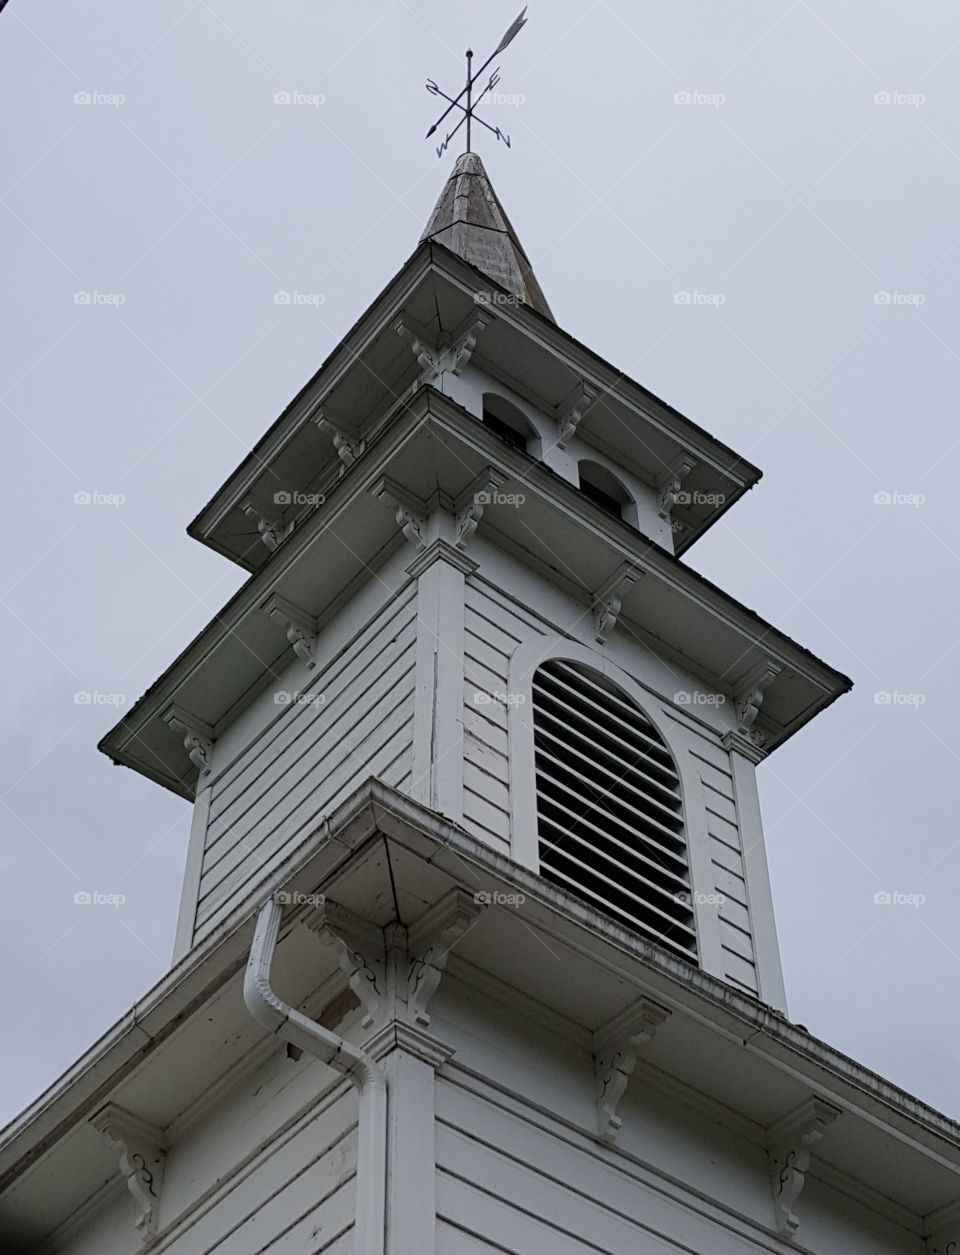 Church Steeple with Weather Vane